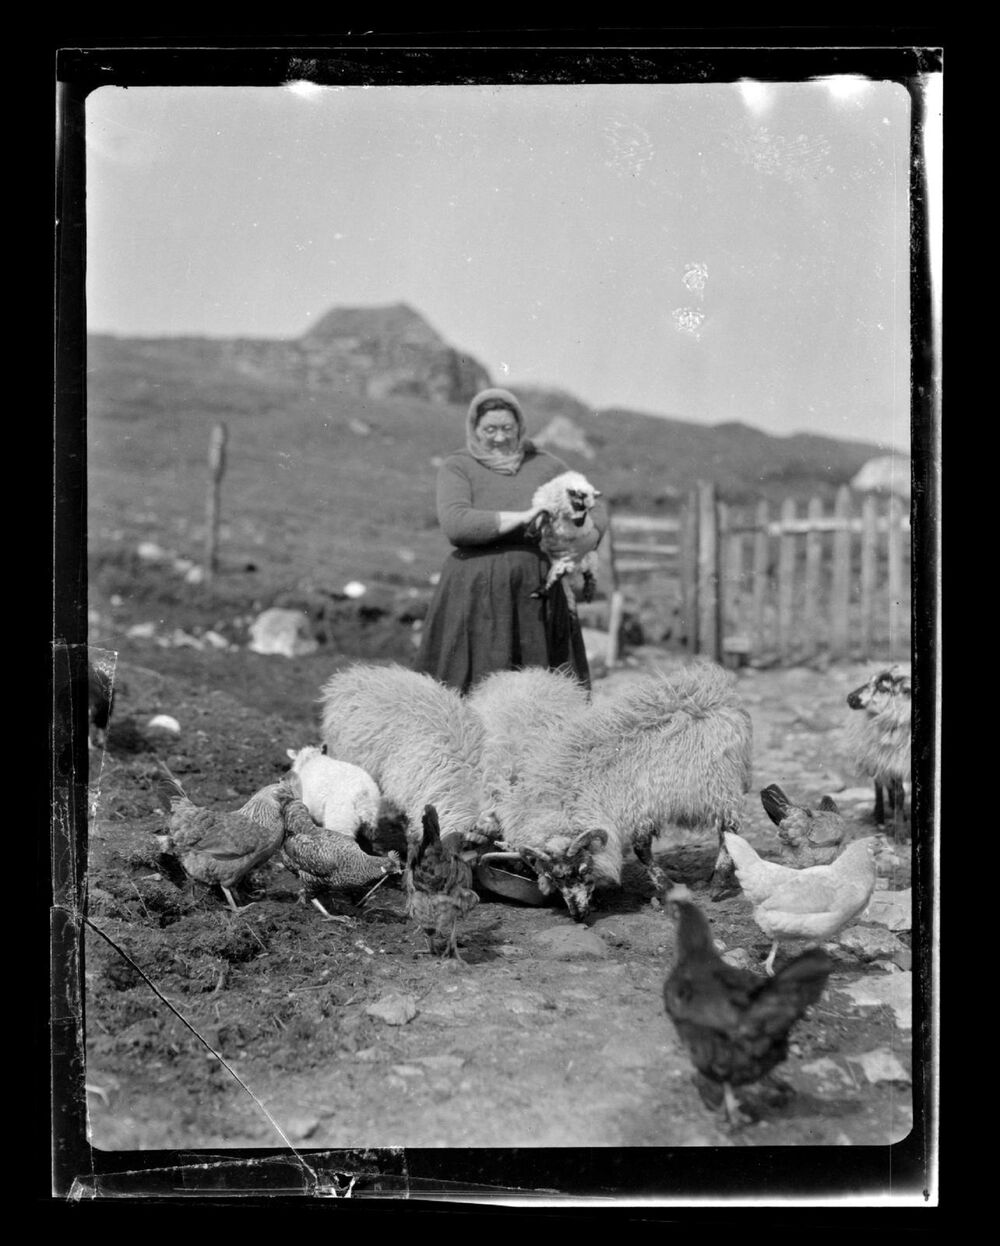 A black and white photographic print of an older woman standing on her croft on an island. She holds a lamb under her arm. Around her feet are several sheep and hens, eating from the ground.